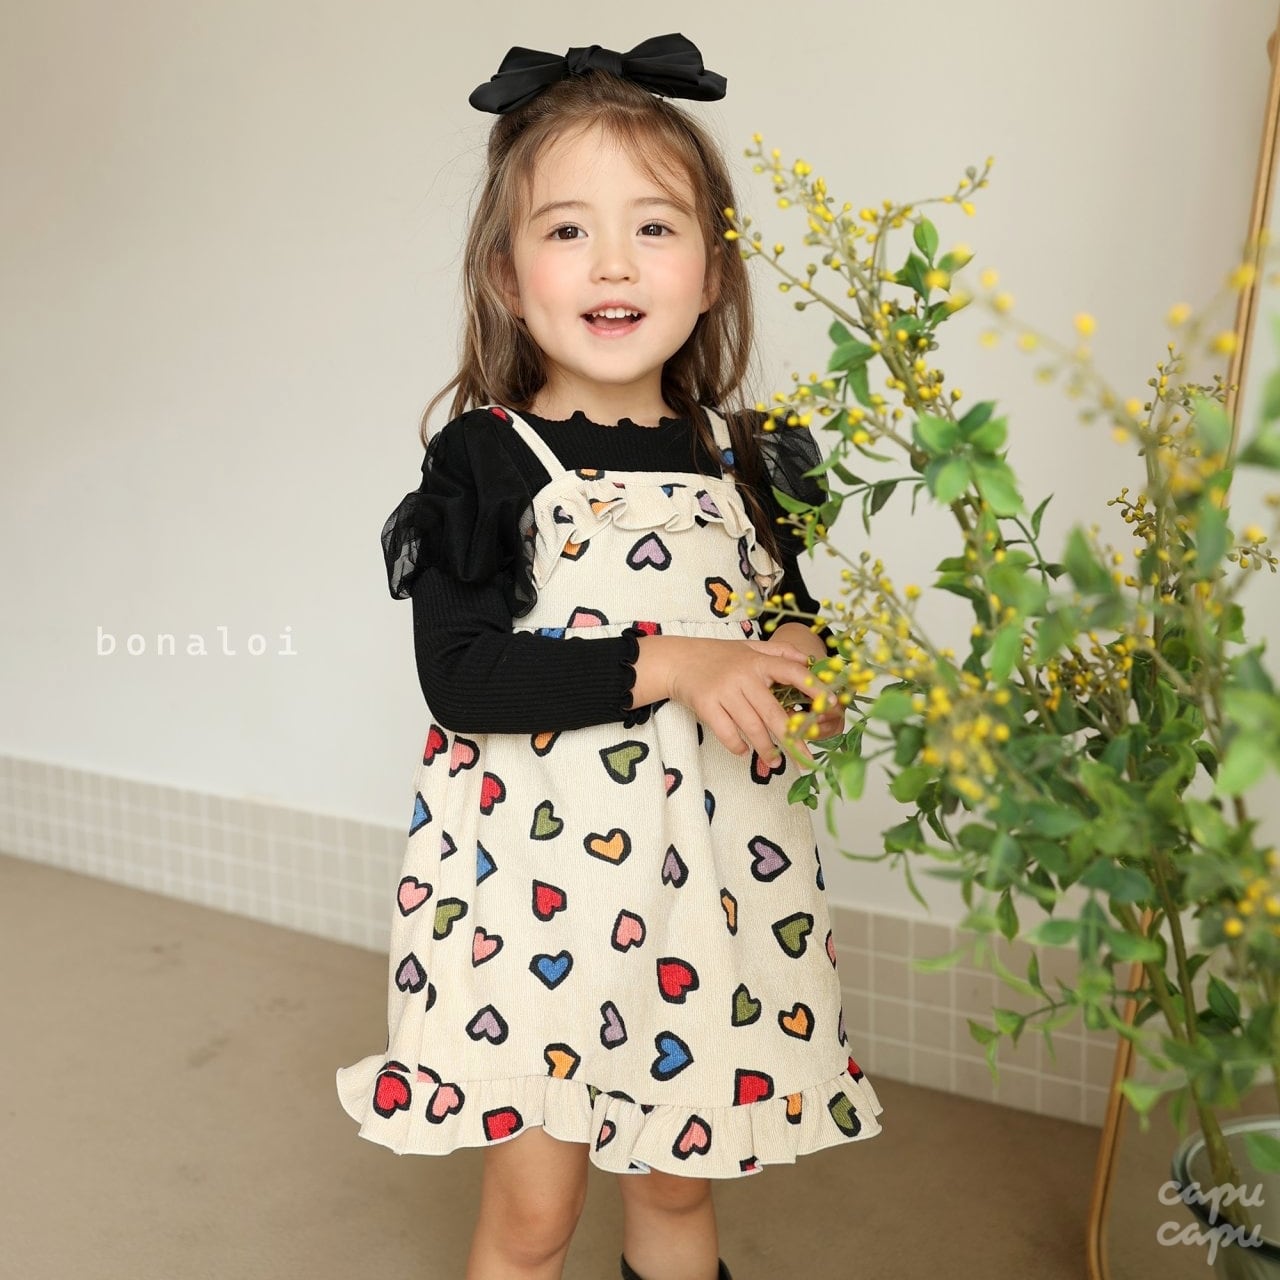 «sold out»«bonaloi» コーデュロイ ハートワンピース | 子供服 capucapu powered by BASE